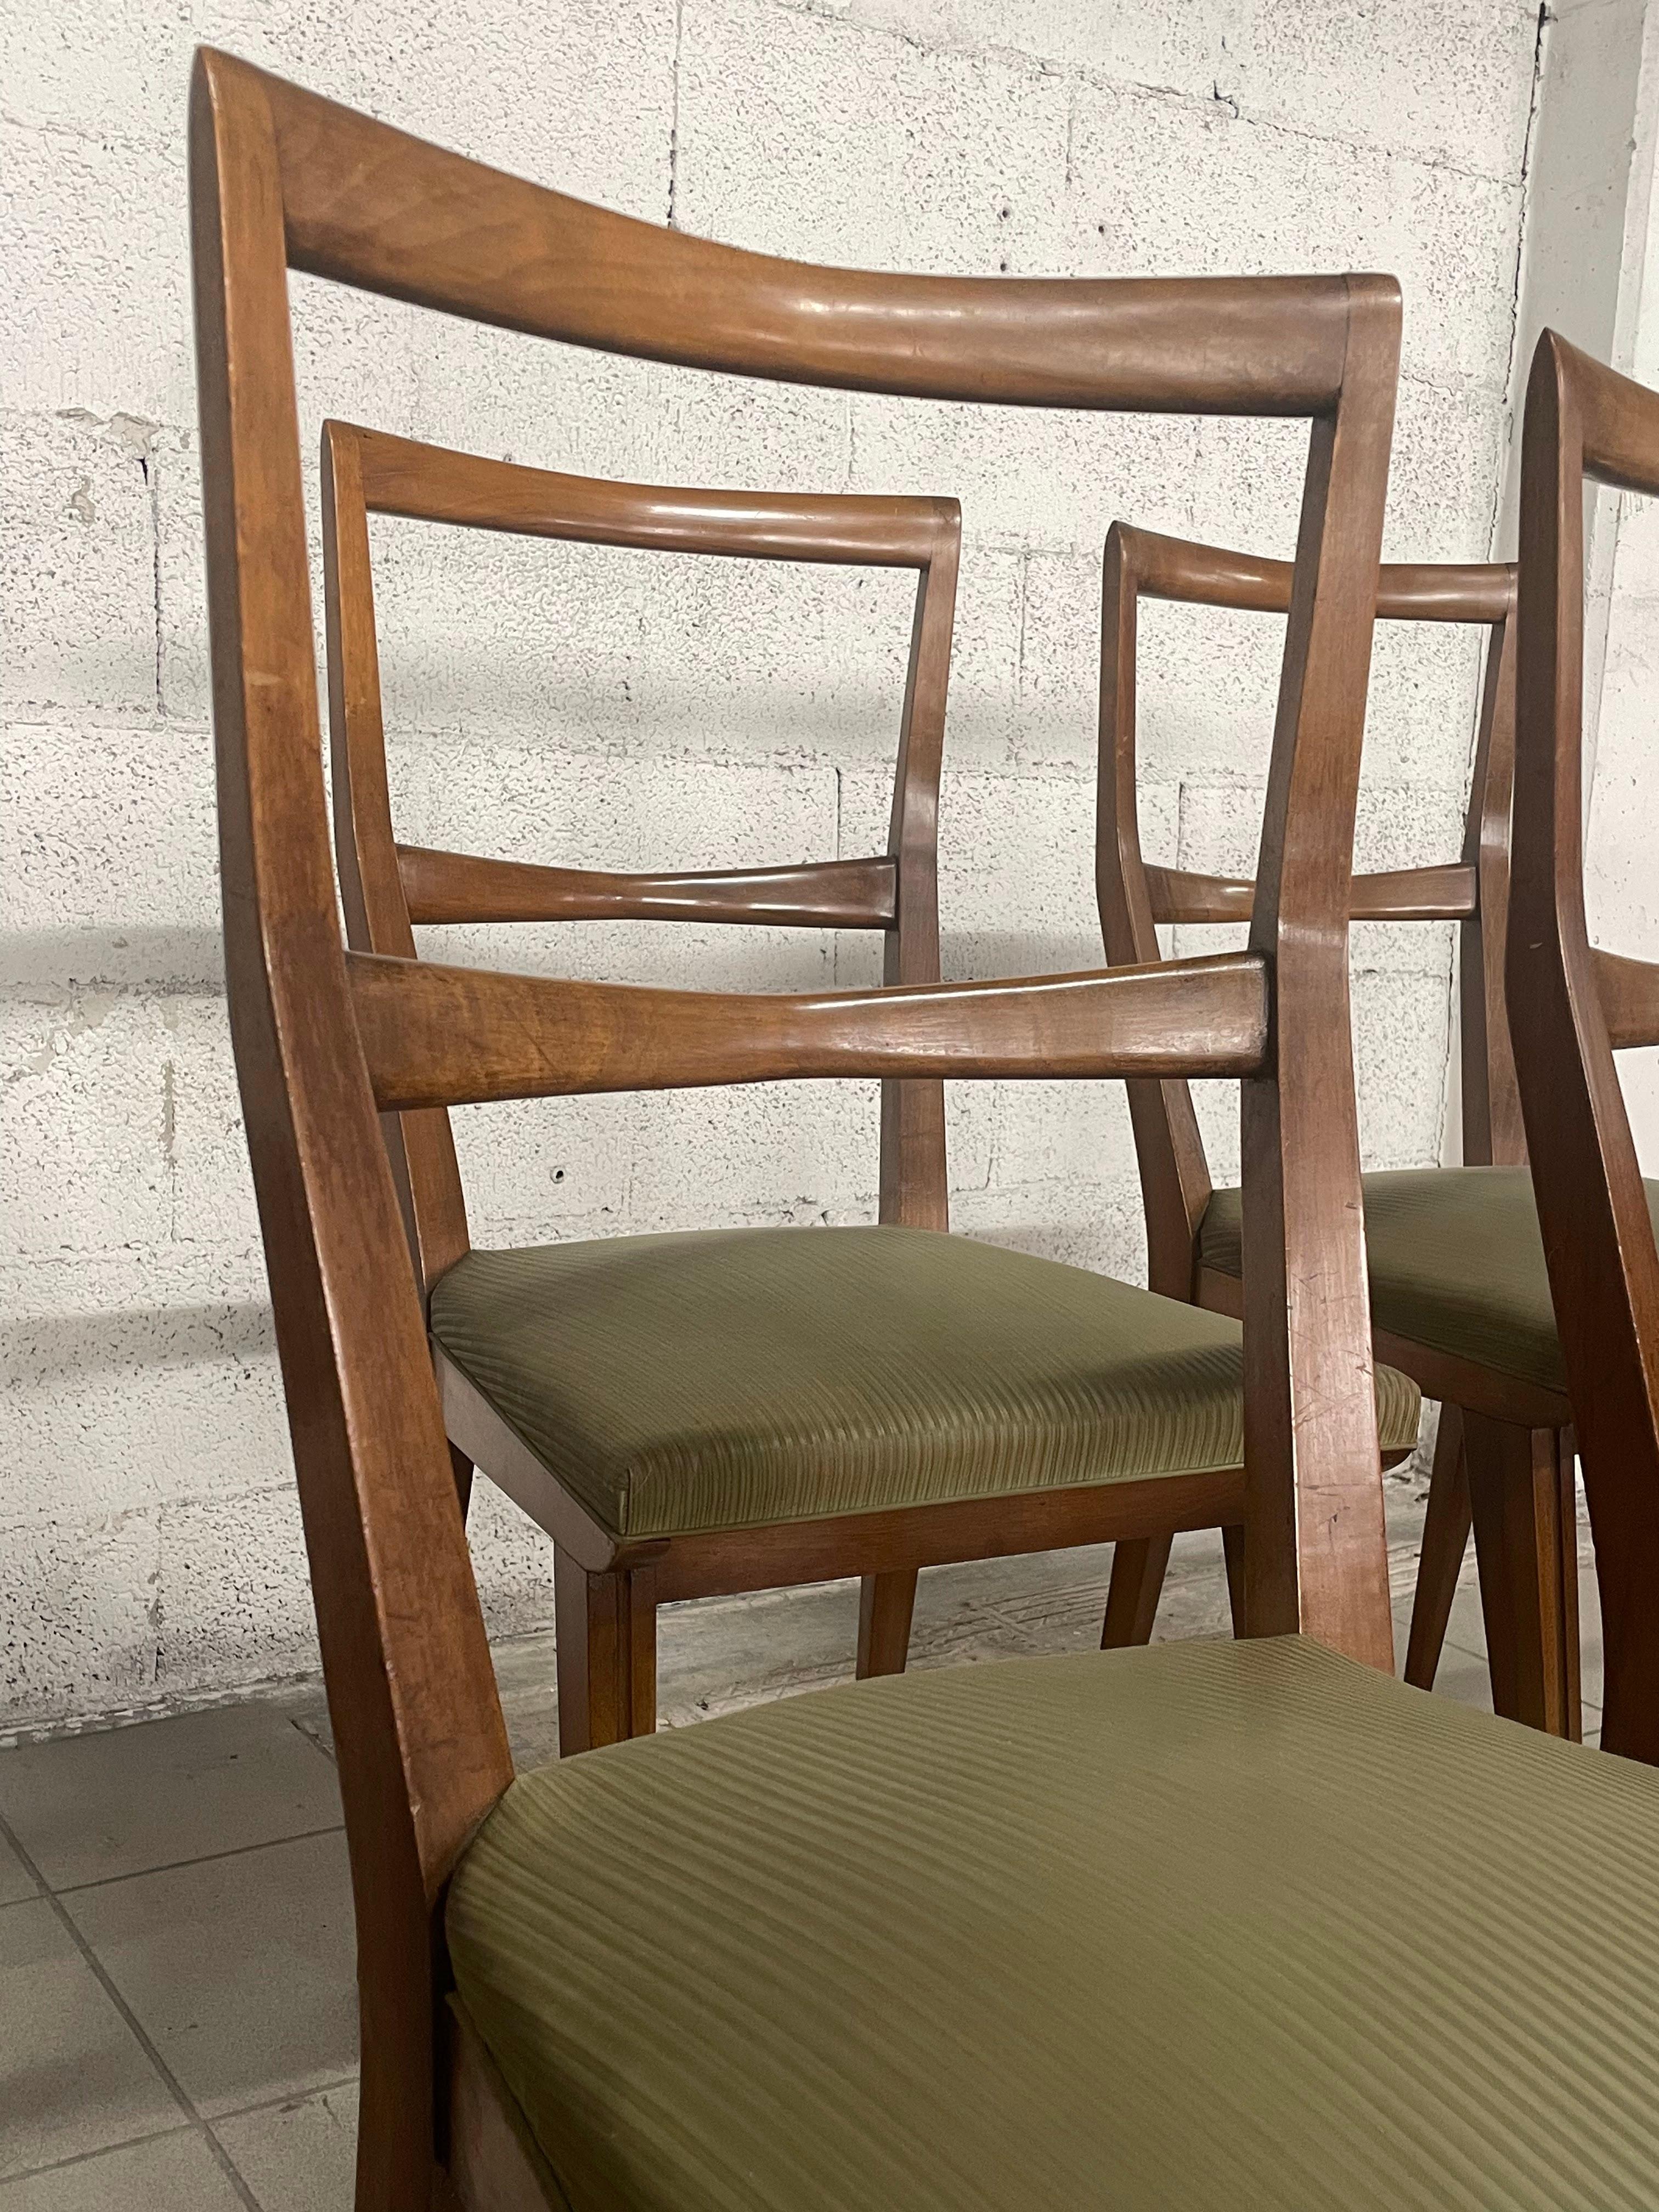 Set of 6 walnut chairs 1960s, Italian manufacture For Sale 1